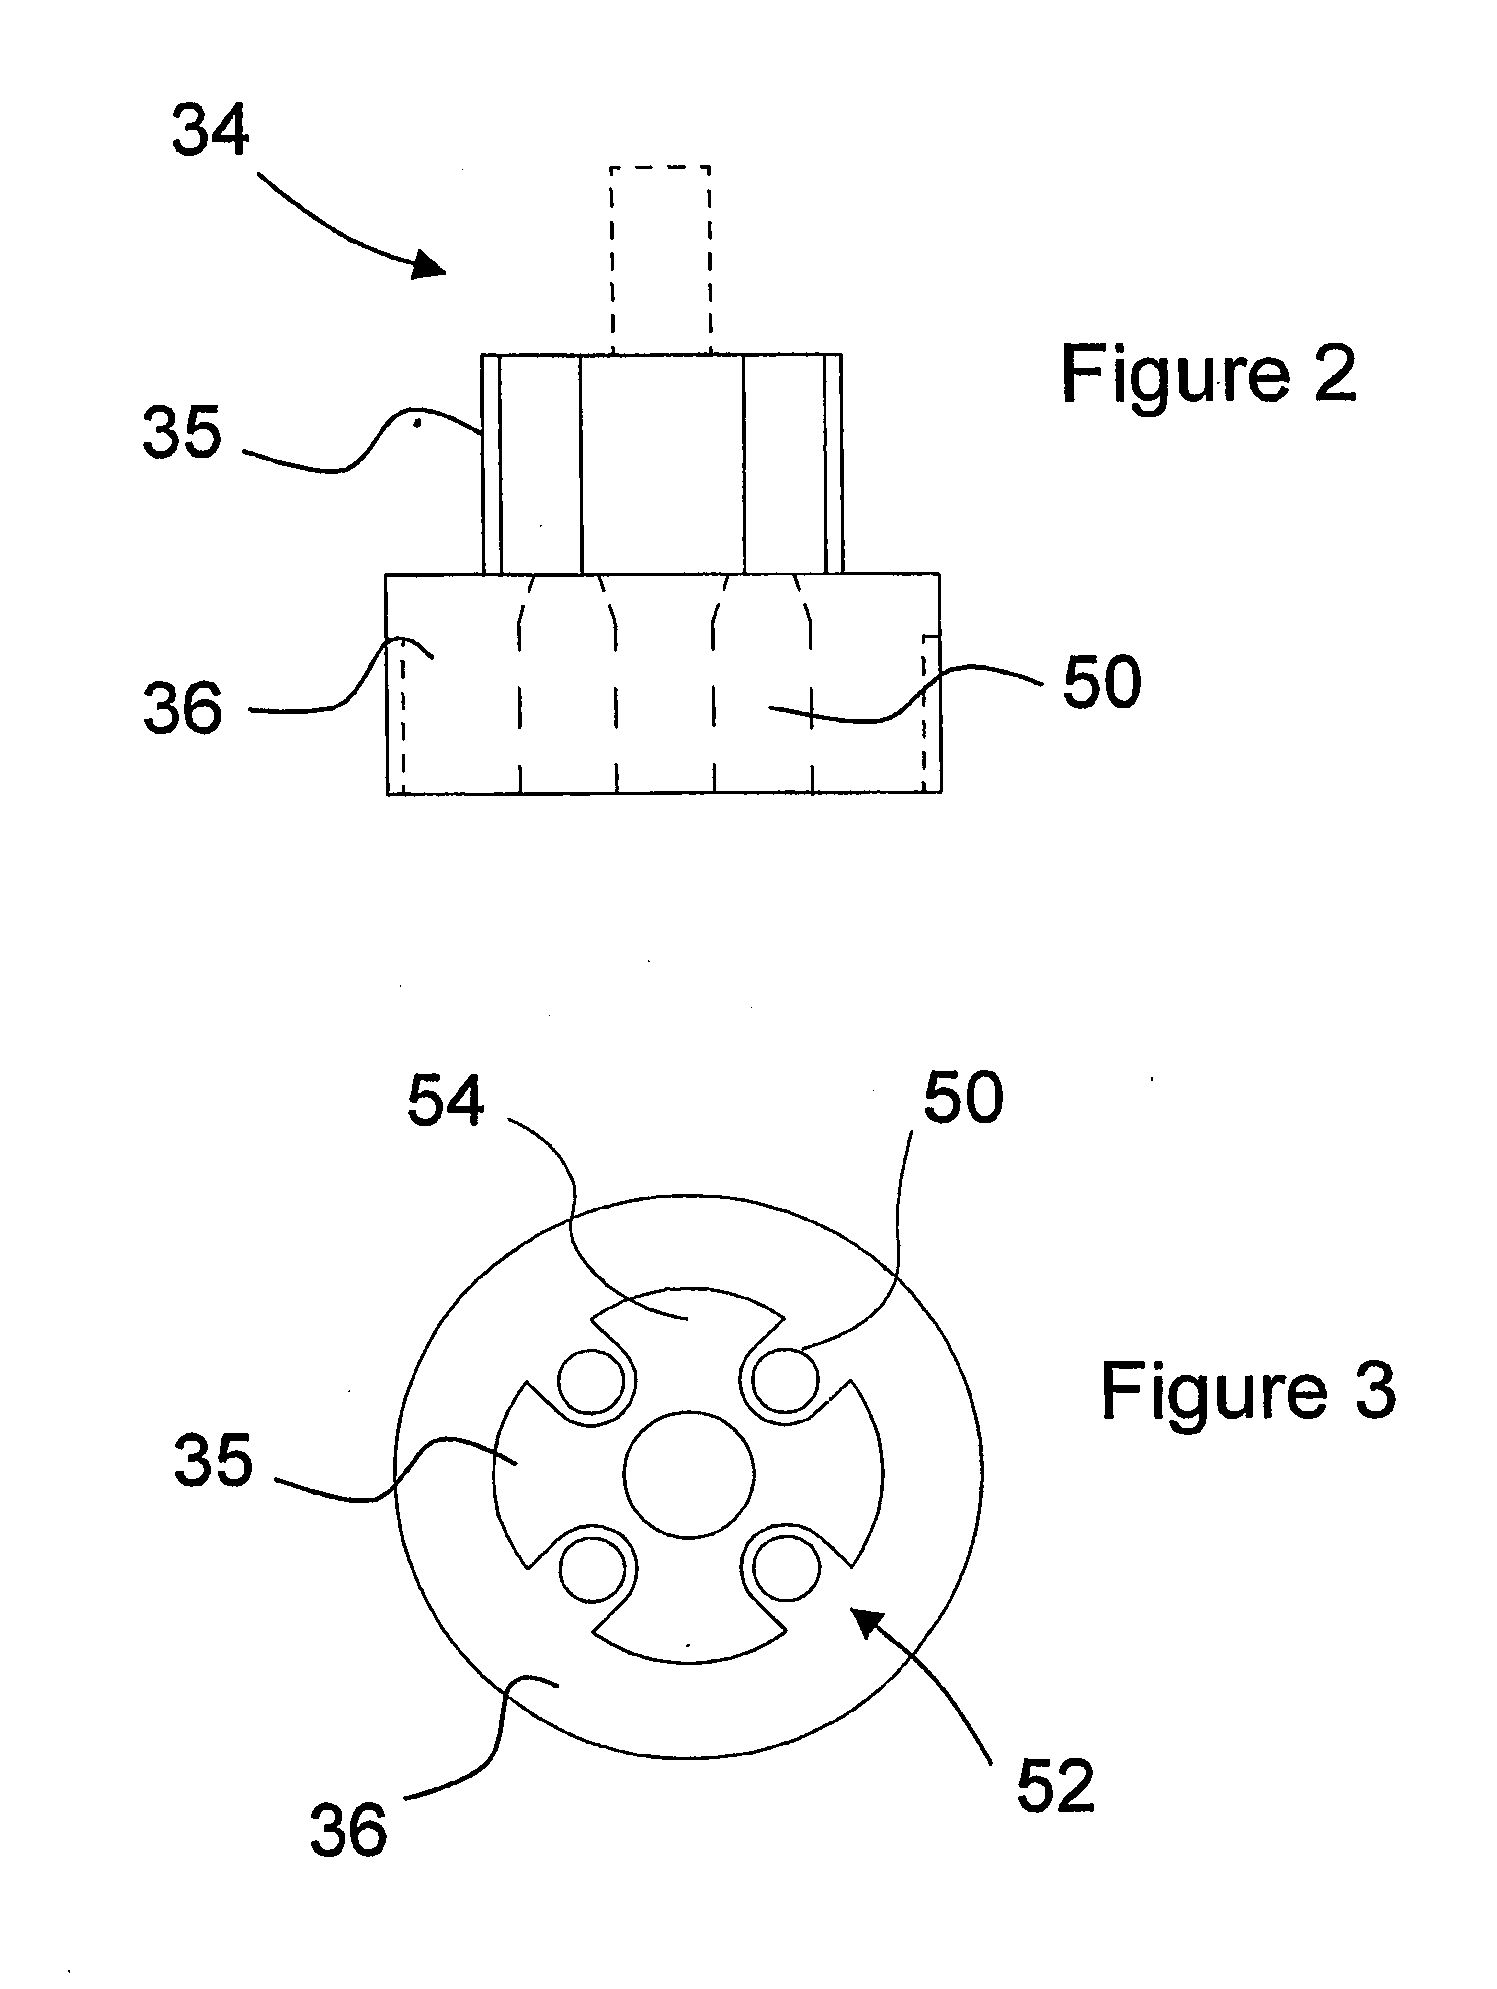 Apparatus for creating pressure pulses in the fluid of a bore hole